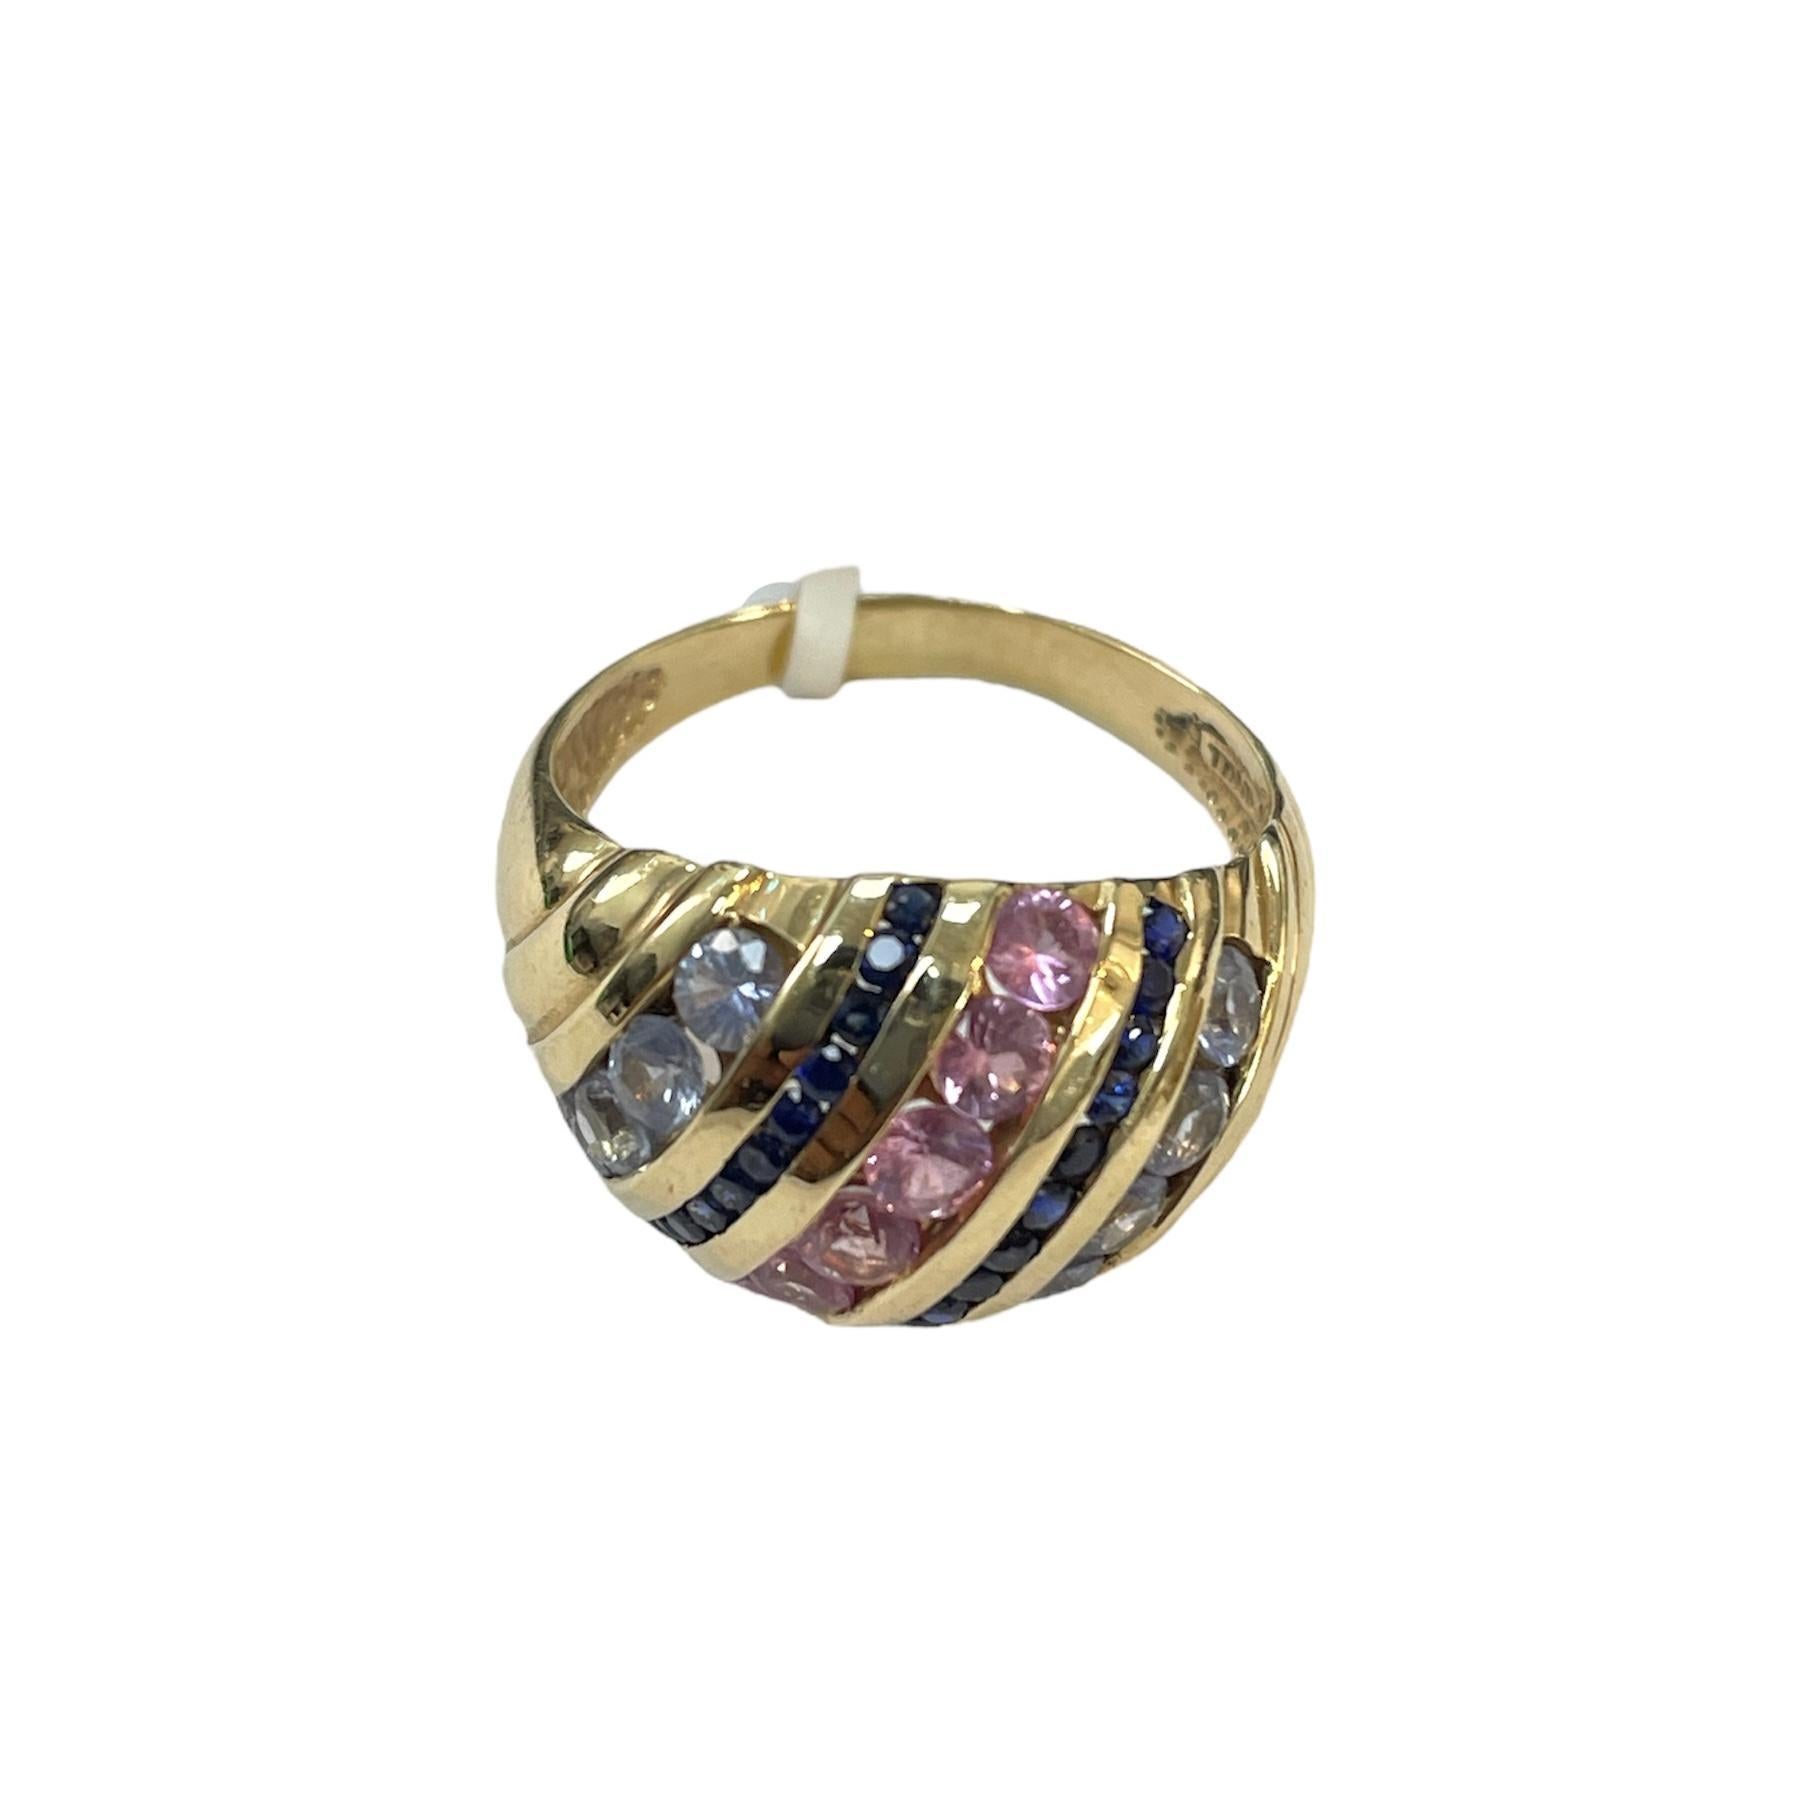 Discover timeless beauty with this exquisite Vintage Multi-Gemstone Ring, a true testament to craftsmanship and style.
Crafted in lustrous 14K yellow gold, this ring showcases an array of colorful gemstones, all carefully selected and set to create